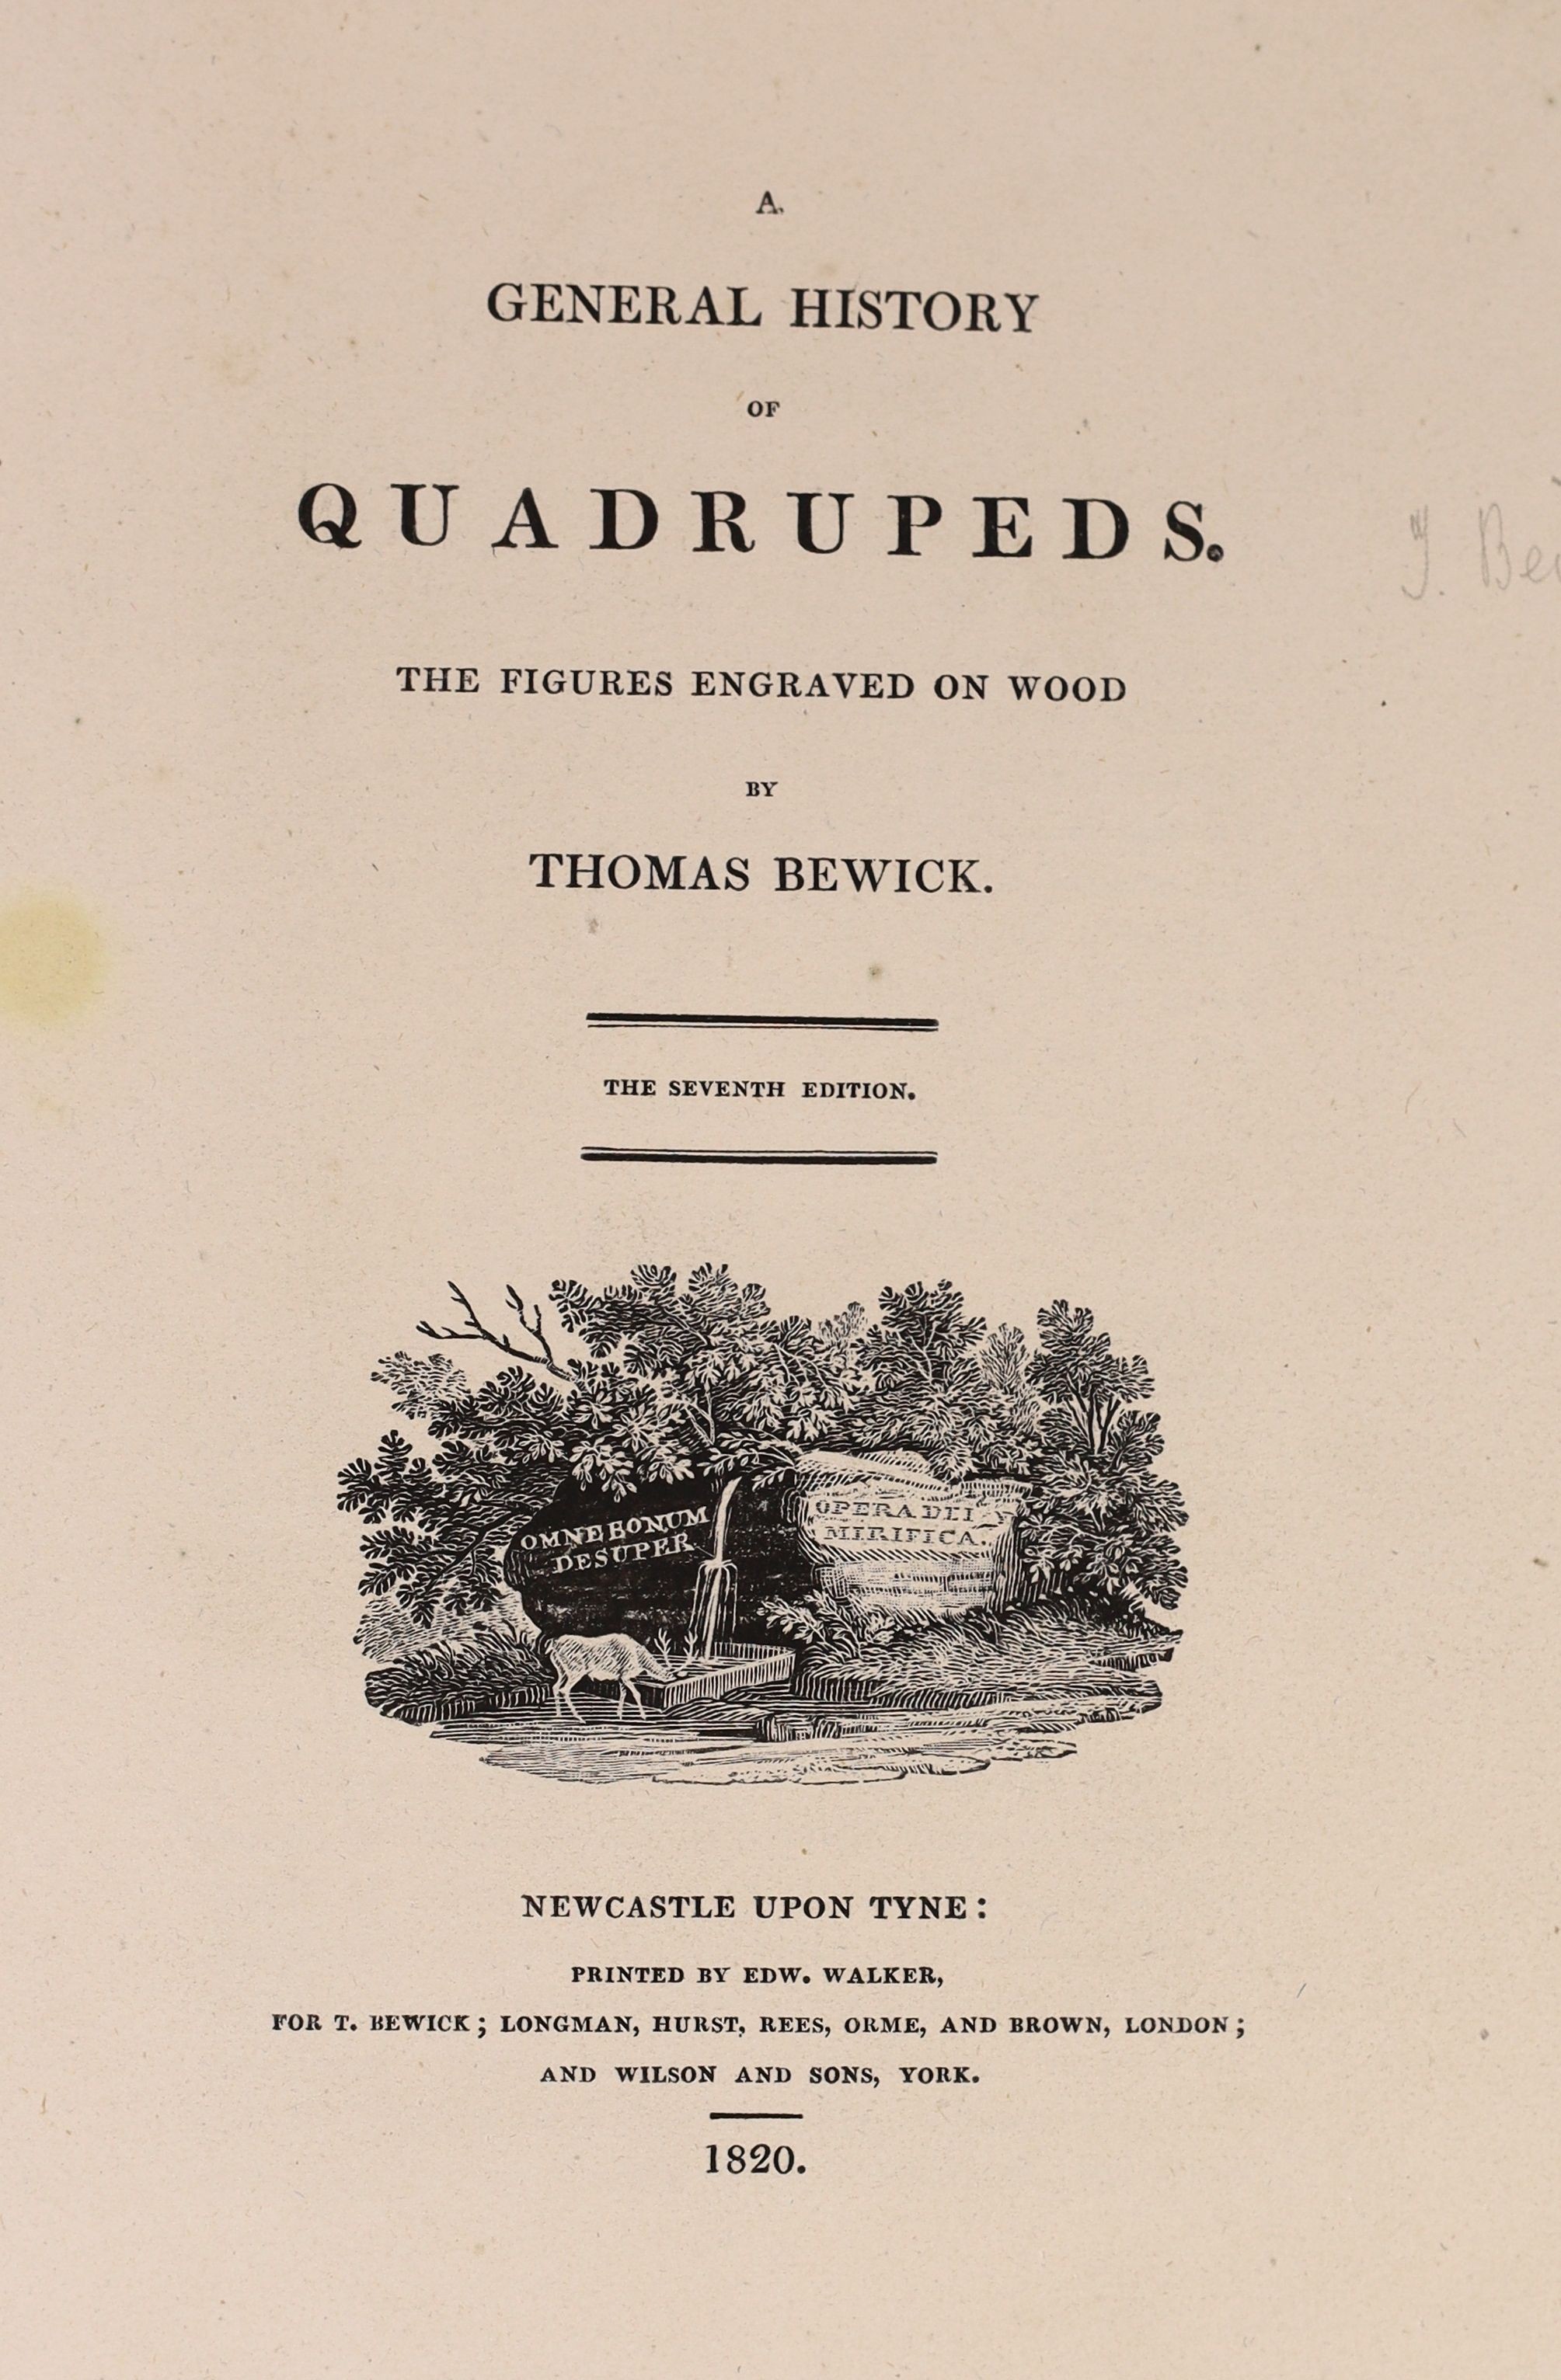 Bewick, Thomas - A General History of Quadrupeds, 7th edition, 8vo, diced calf rebacked, Newcastle, 1820